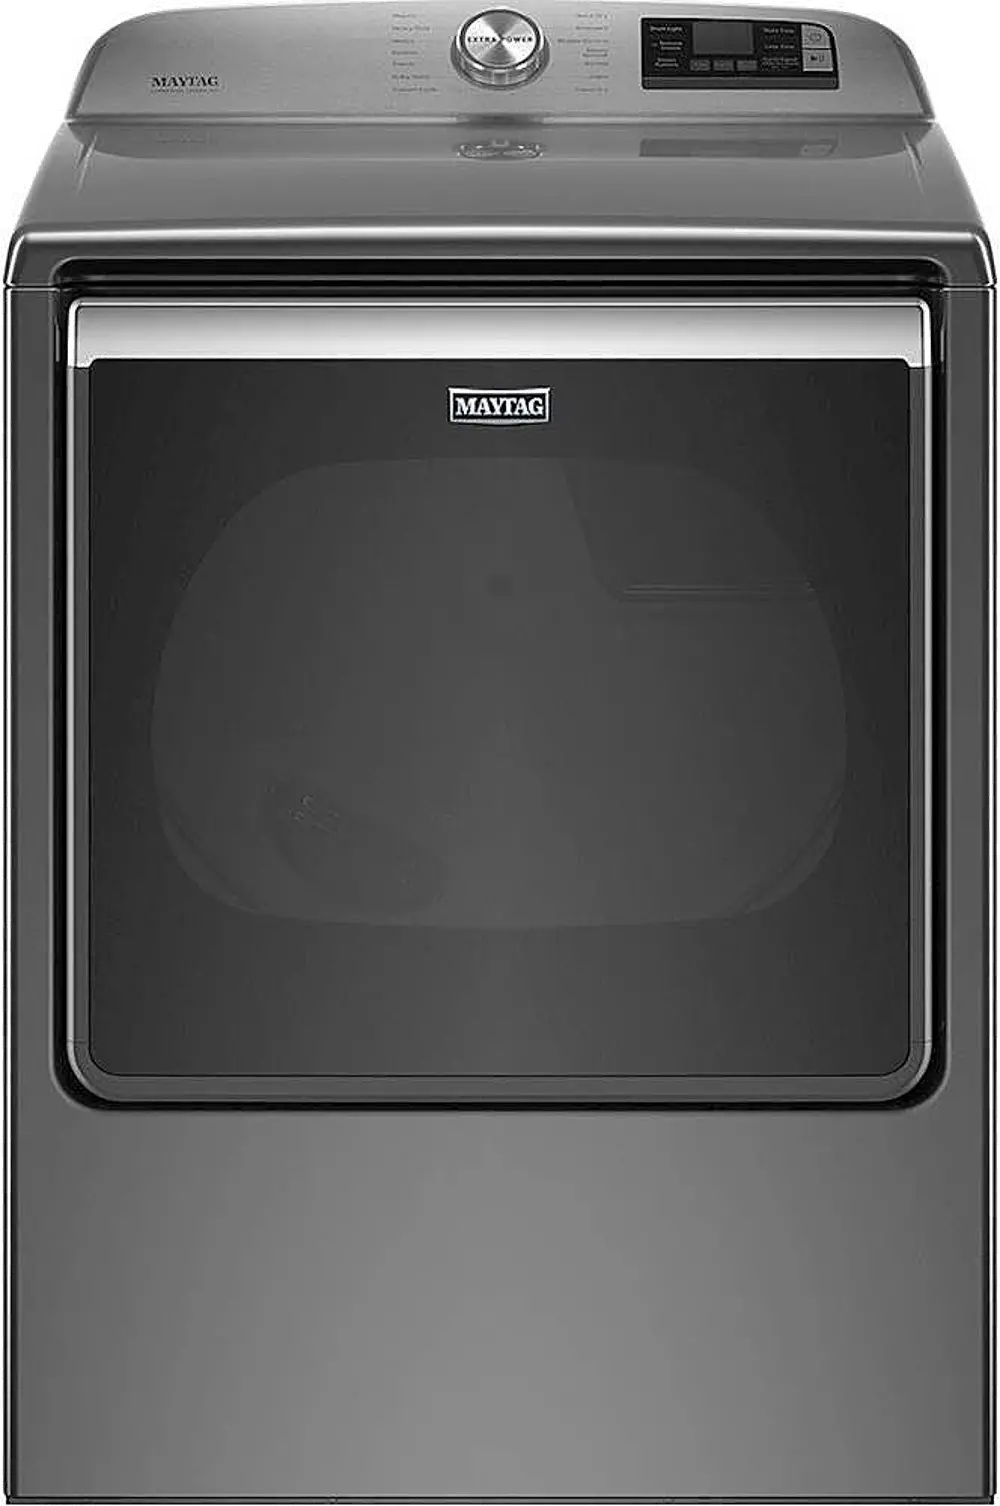 MGD8230HC Maytag Smart Capable Gas Dryer with Extra Power Button - 8.8 Cu. Ft. Metallic Slate-1